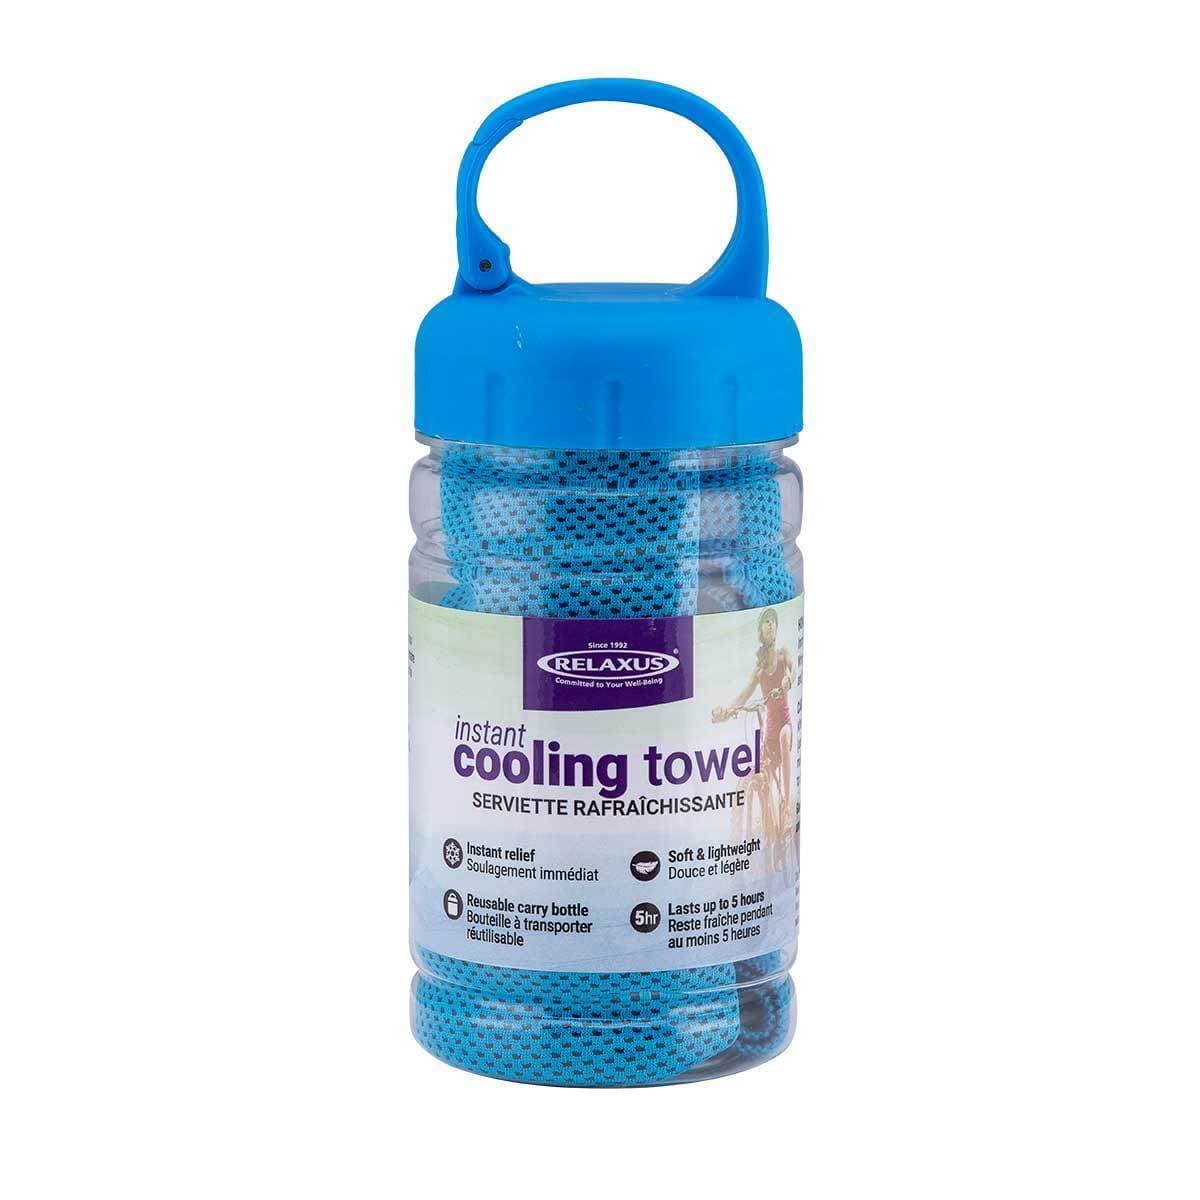 INSTANT COOLING TOWELS